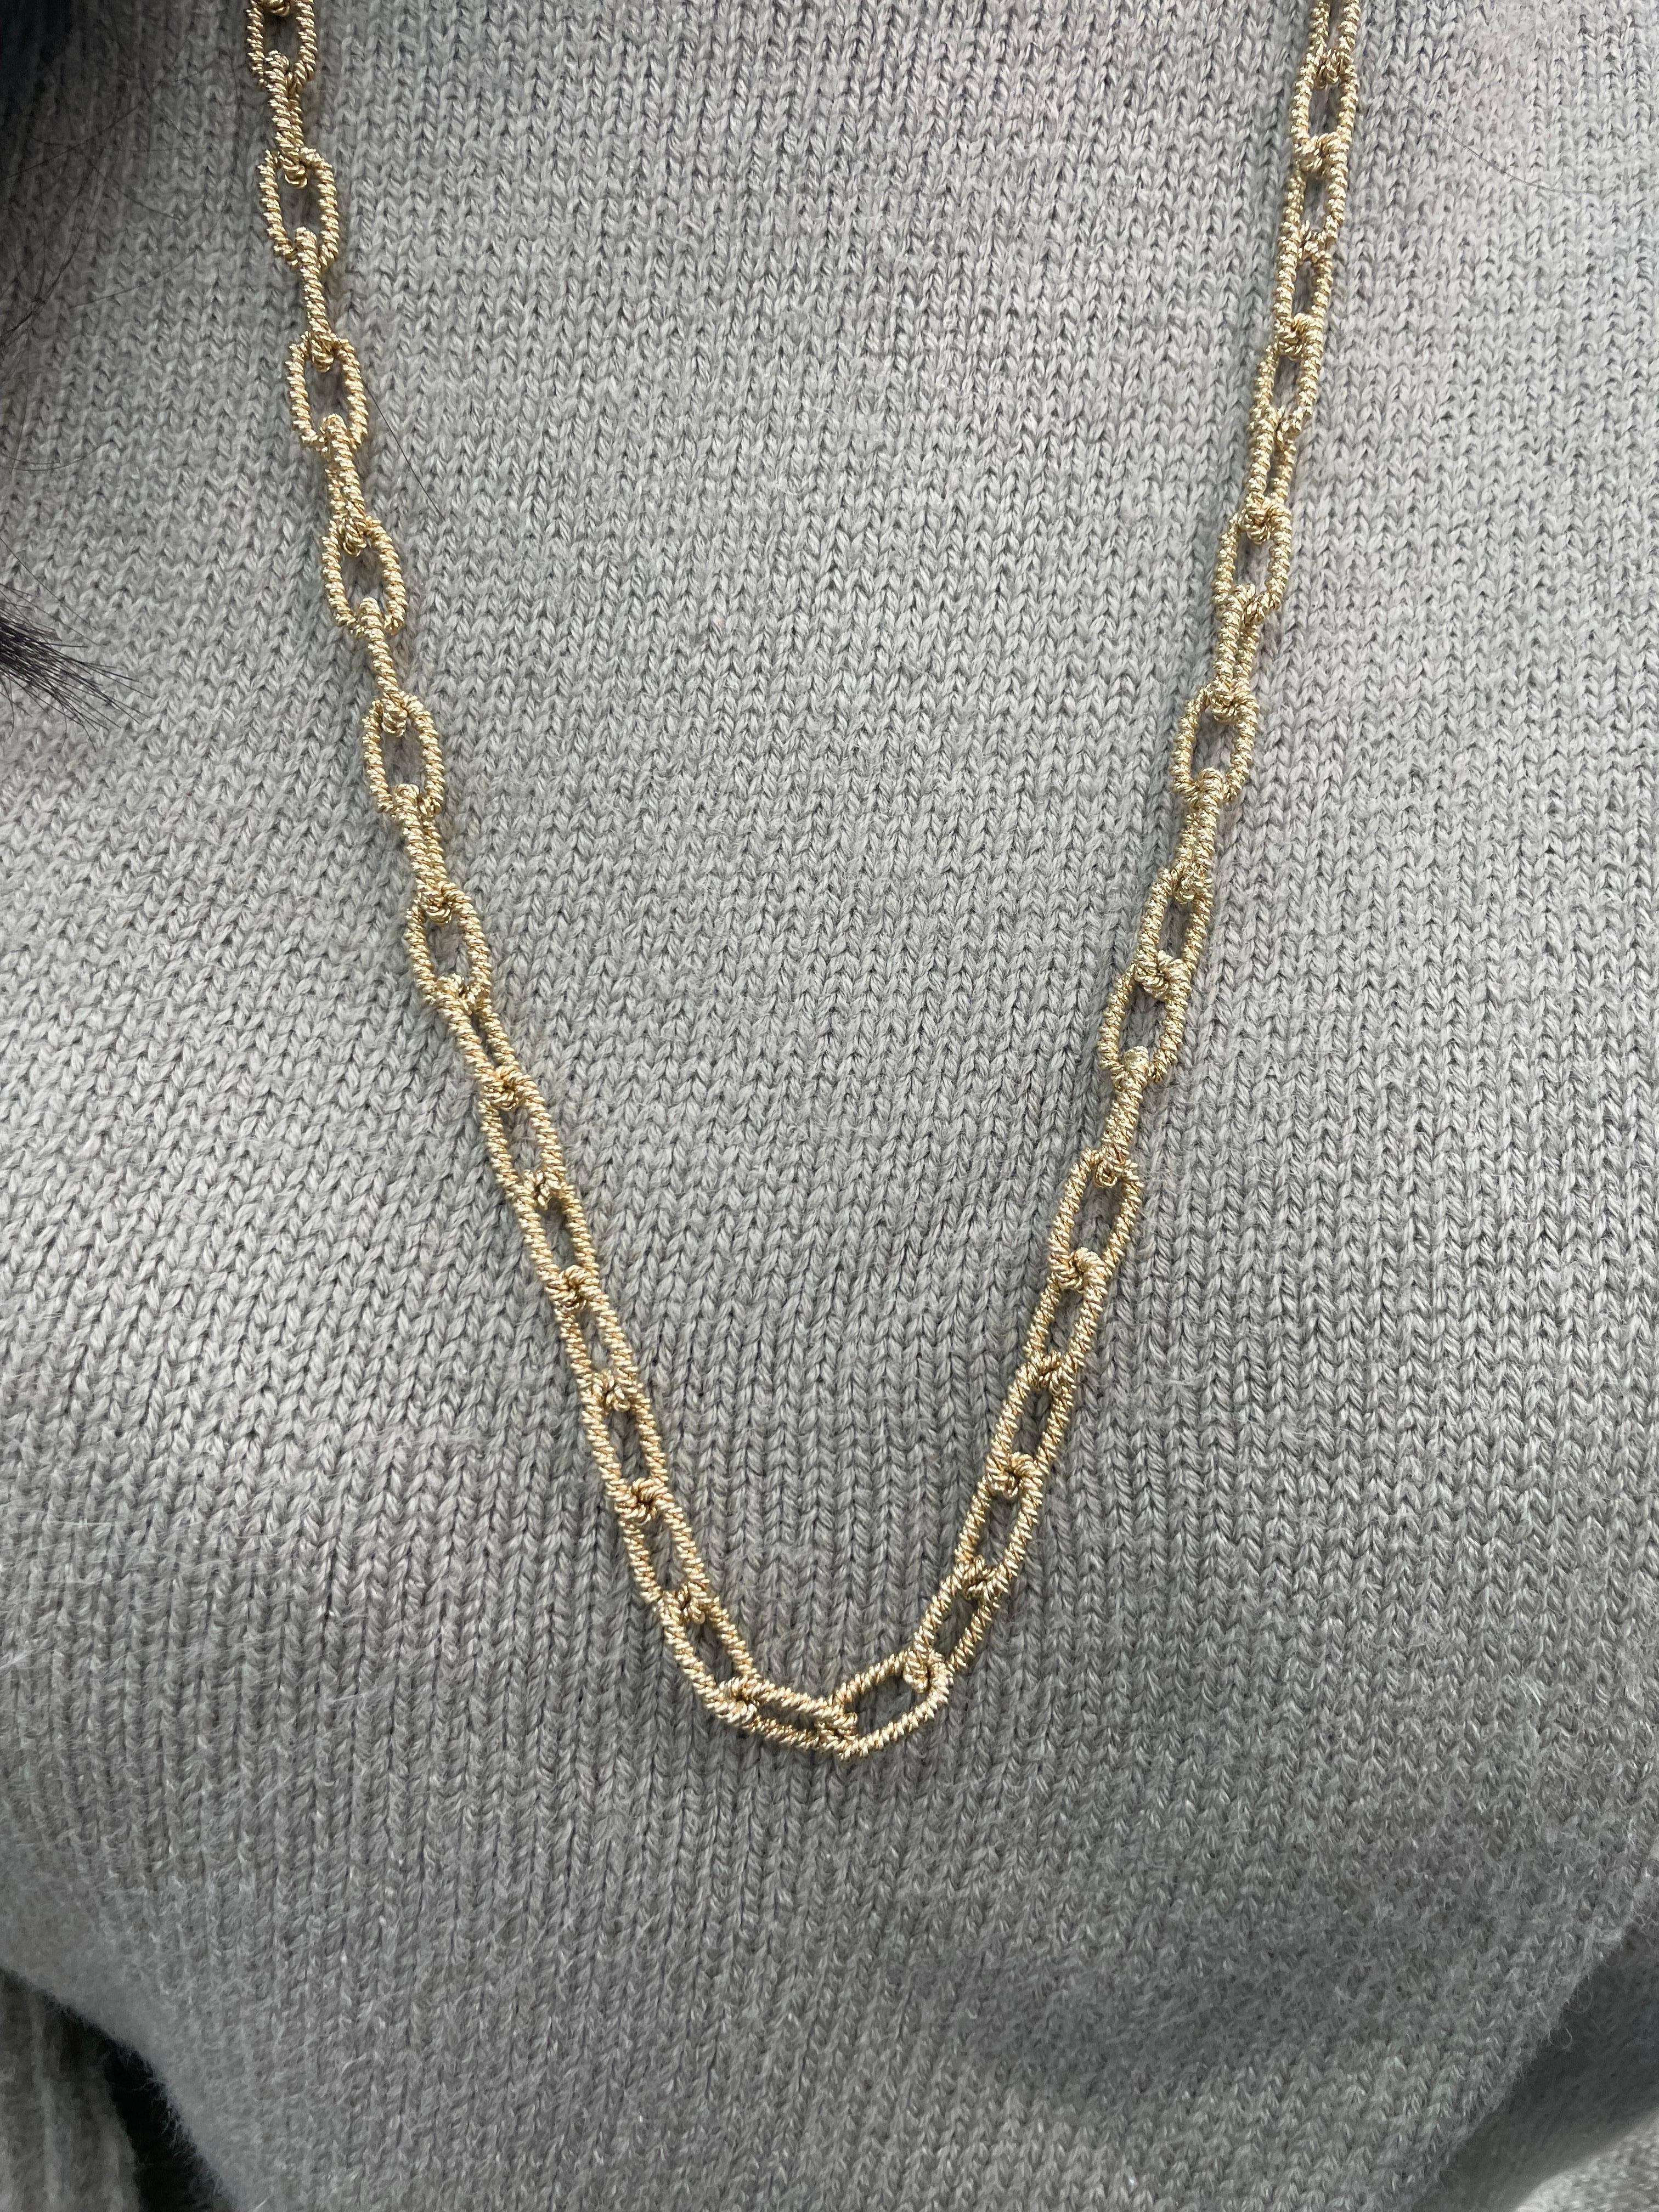 14 Karat Yellow Gold Heavy Rope Link Chain Necklace 84.5 Grams For Sale 10